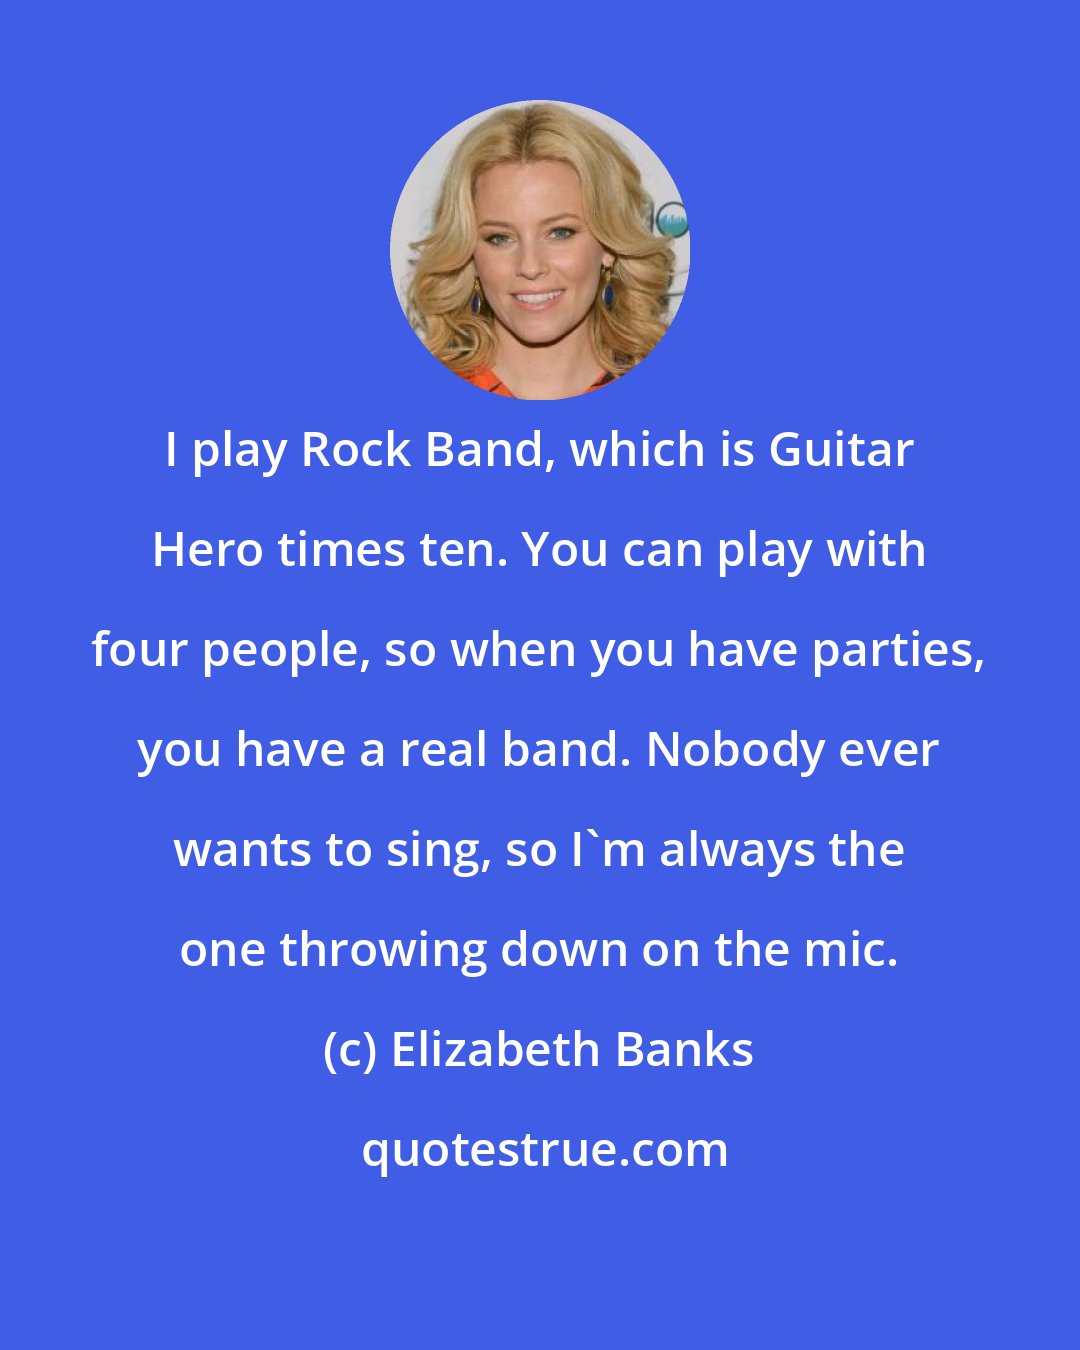 Elizabeth Banks: I play Rock Band, which is Guitar Hero times ten. You can play with four people, so when you have parties, you have a real band. Nobody ever wants to sing, so I'm always the one throwing down on the mic.